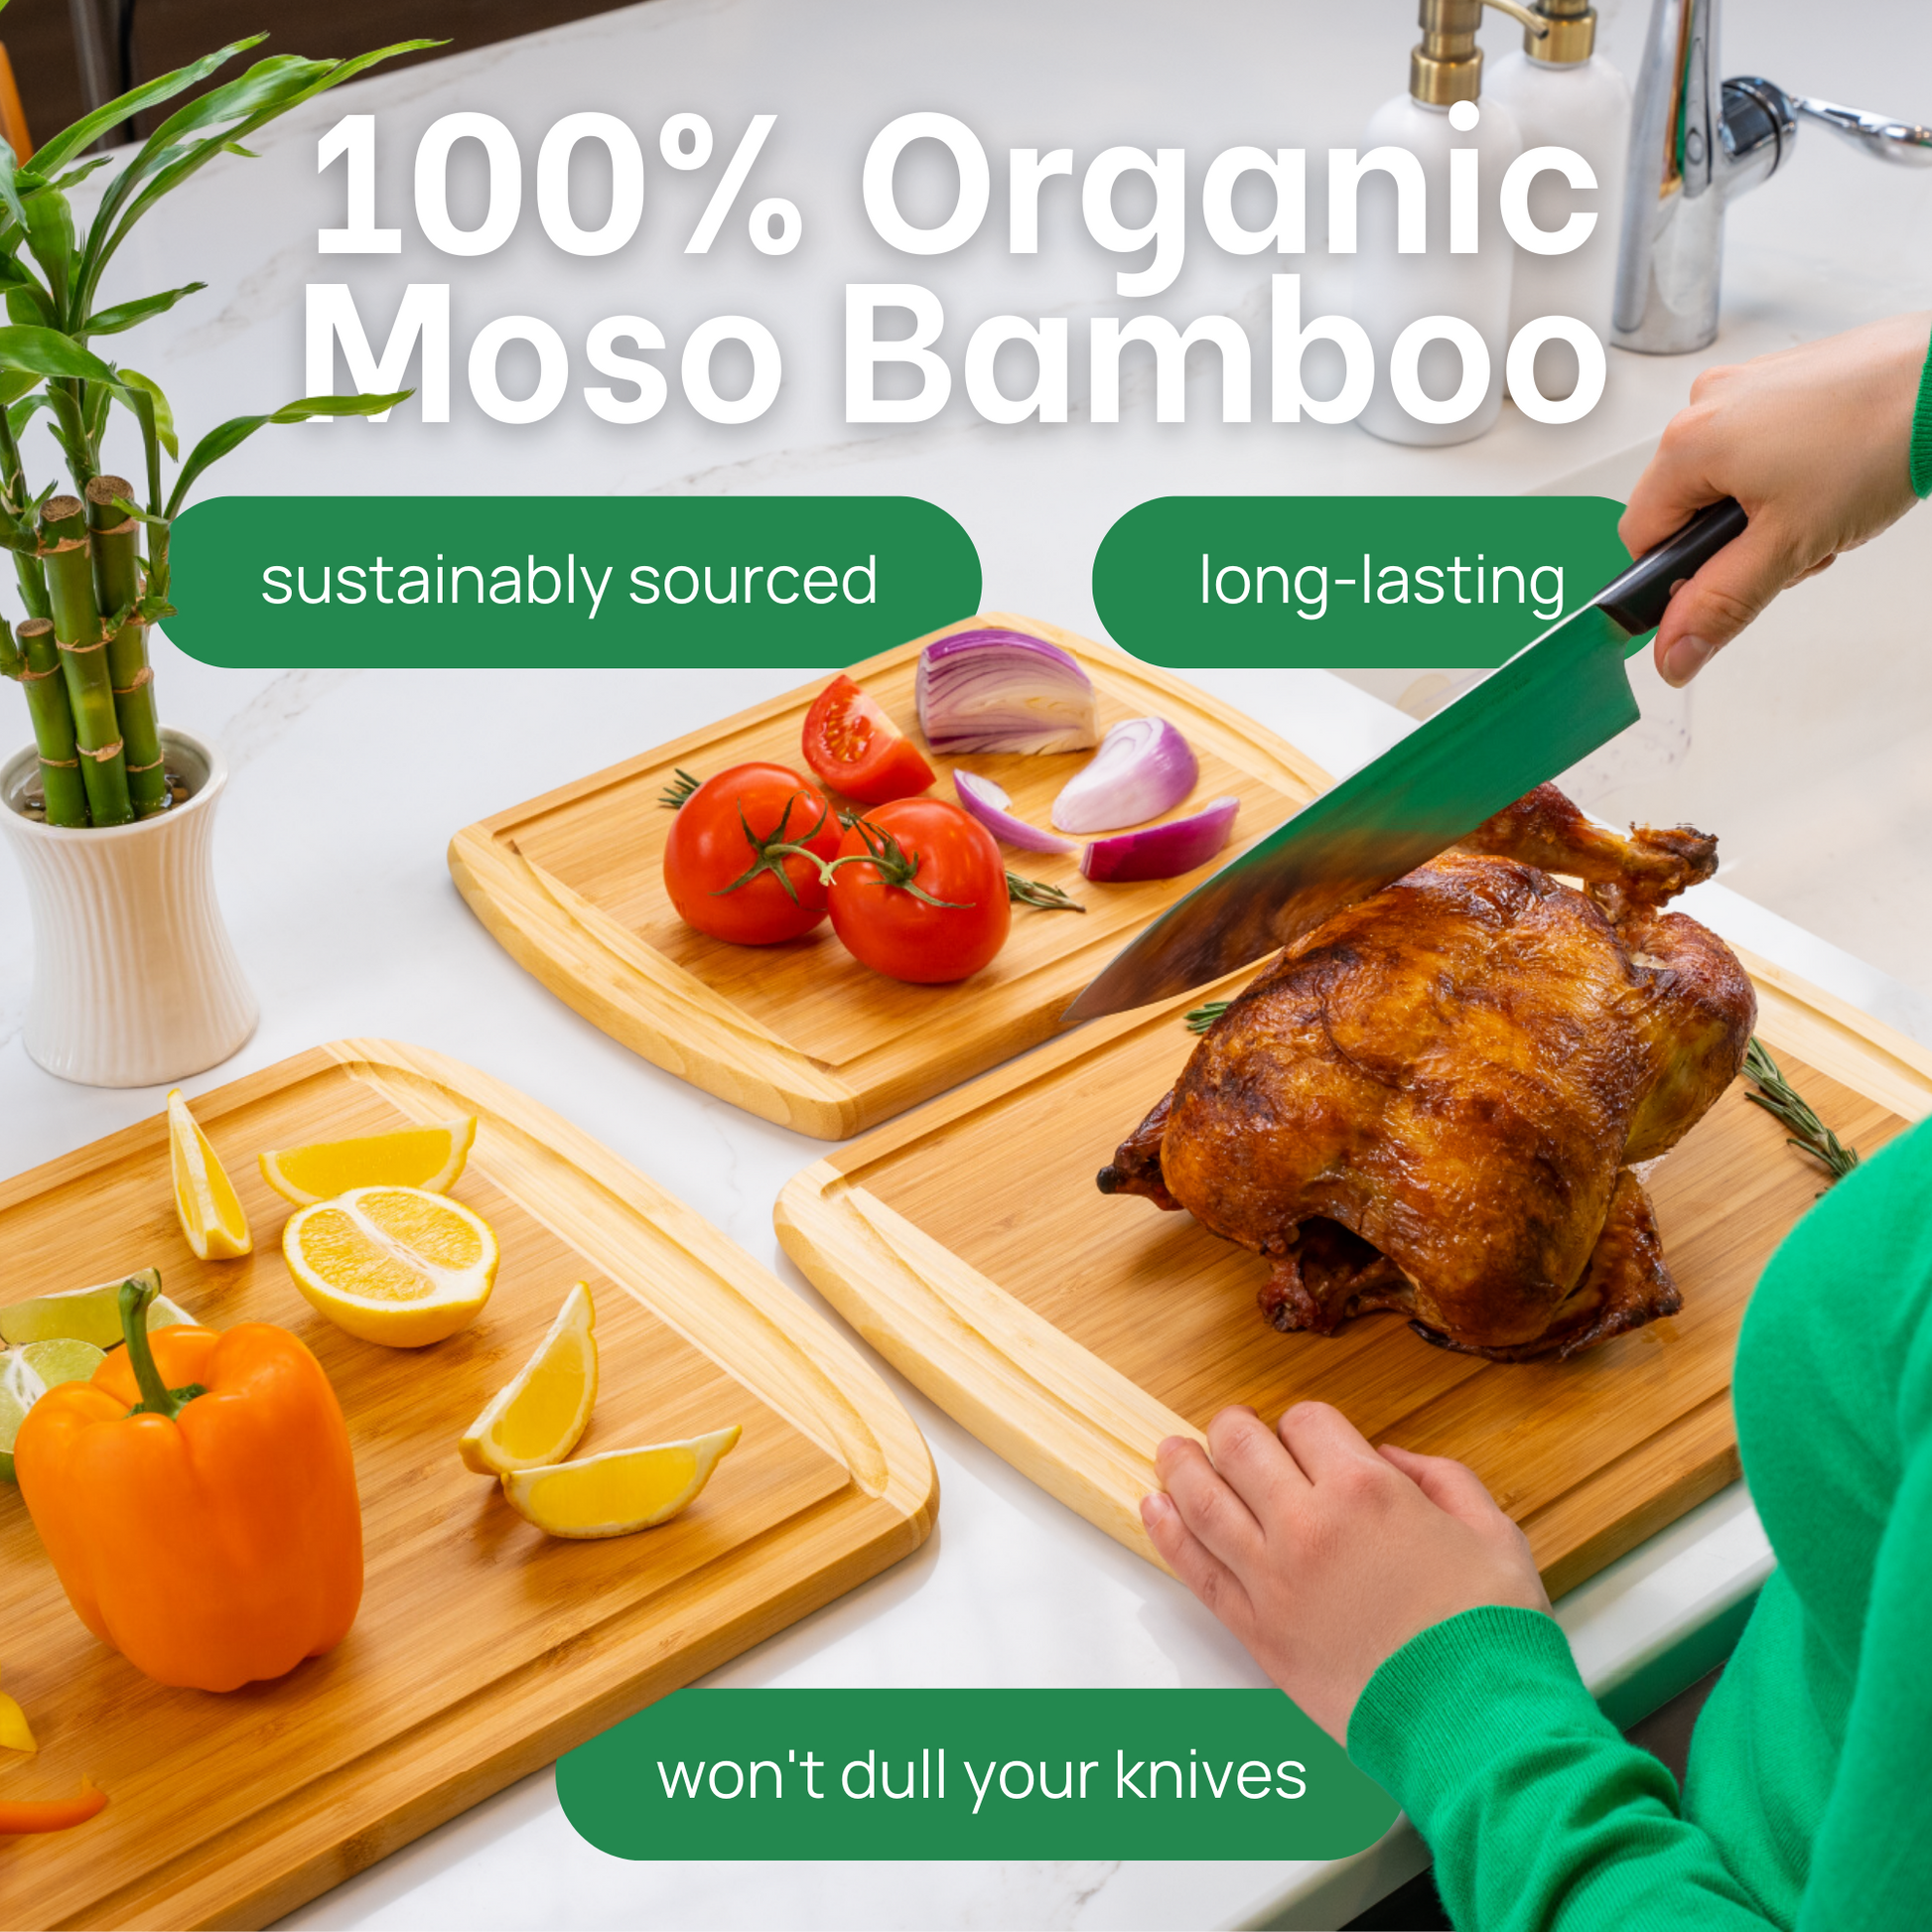 Organic Bamboo Cutting Board W/Containers Chopping Carving For Storage Prep